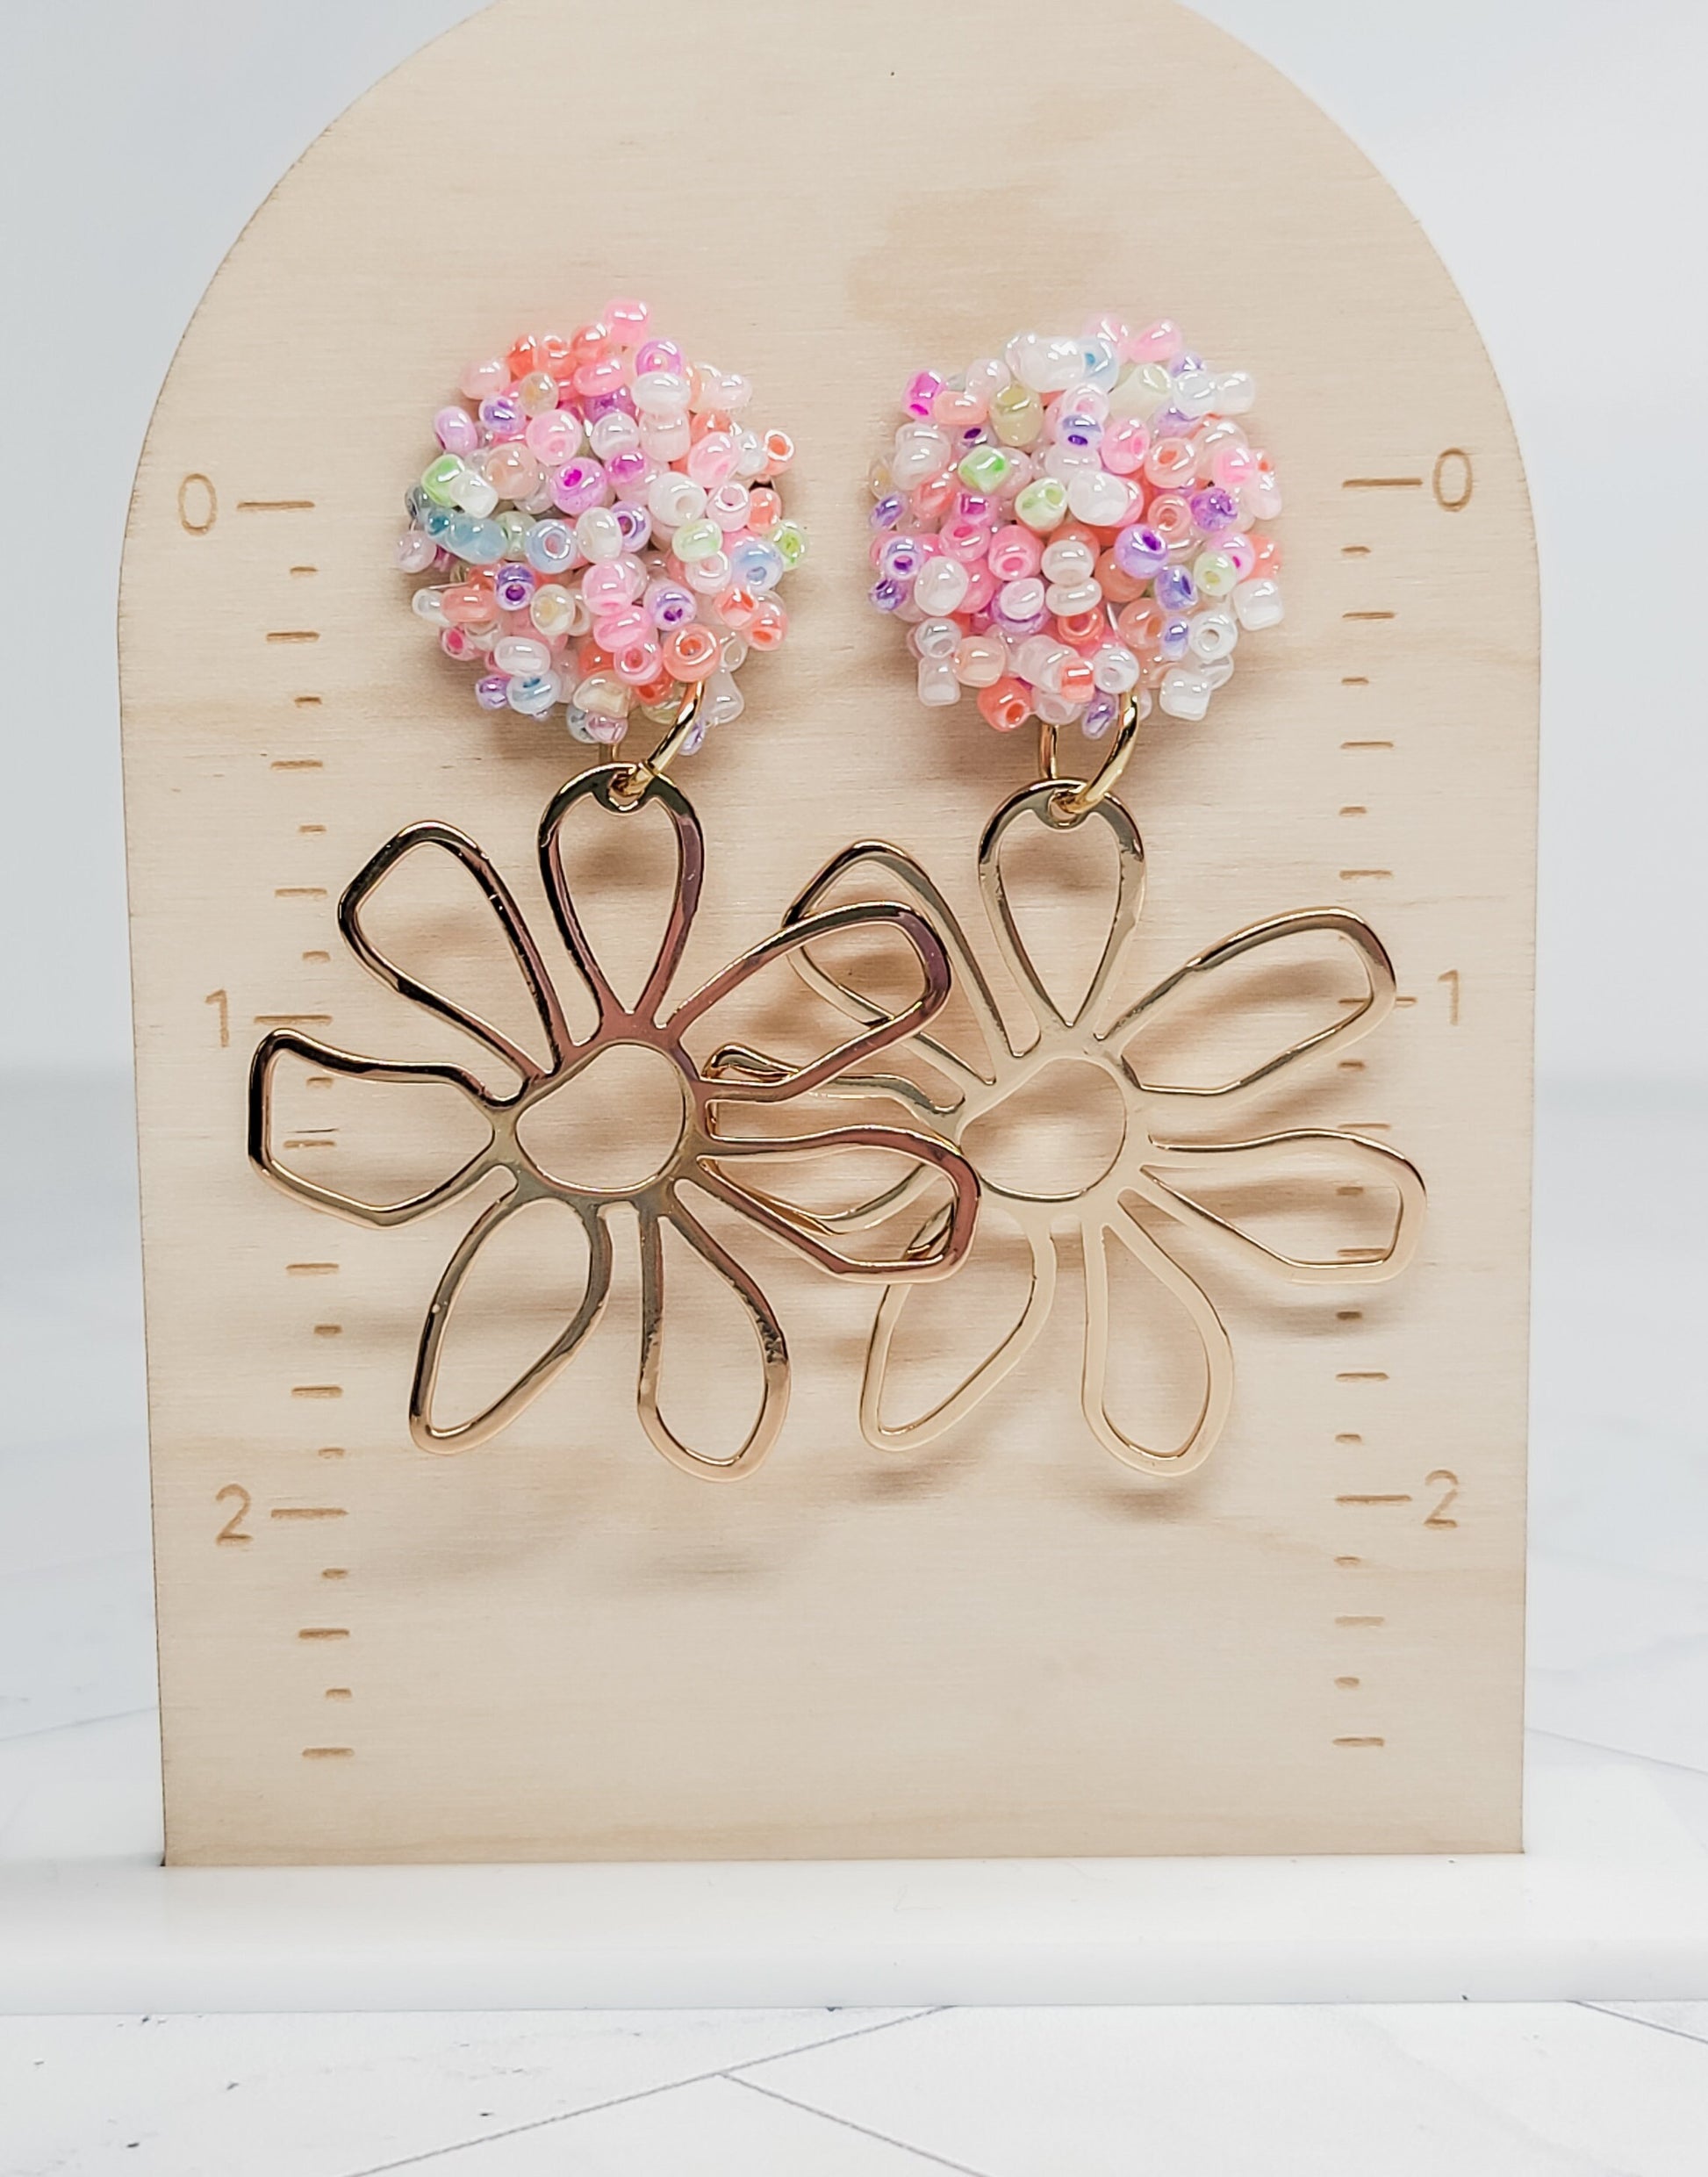 Boho Floral Earrings, Floral Dangles, Flower Jewelry, Acrylic Dangle Statement Earrings, Spring Accessiories